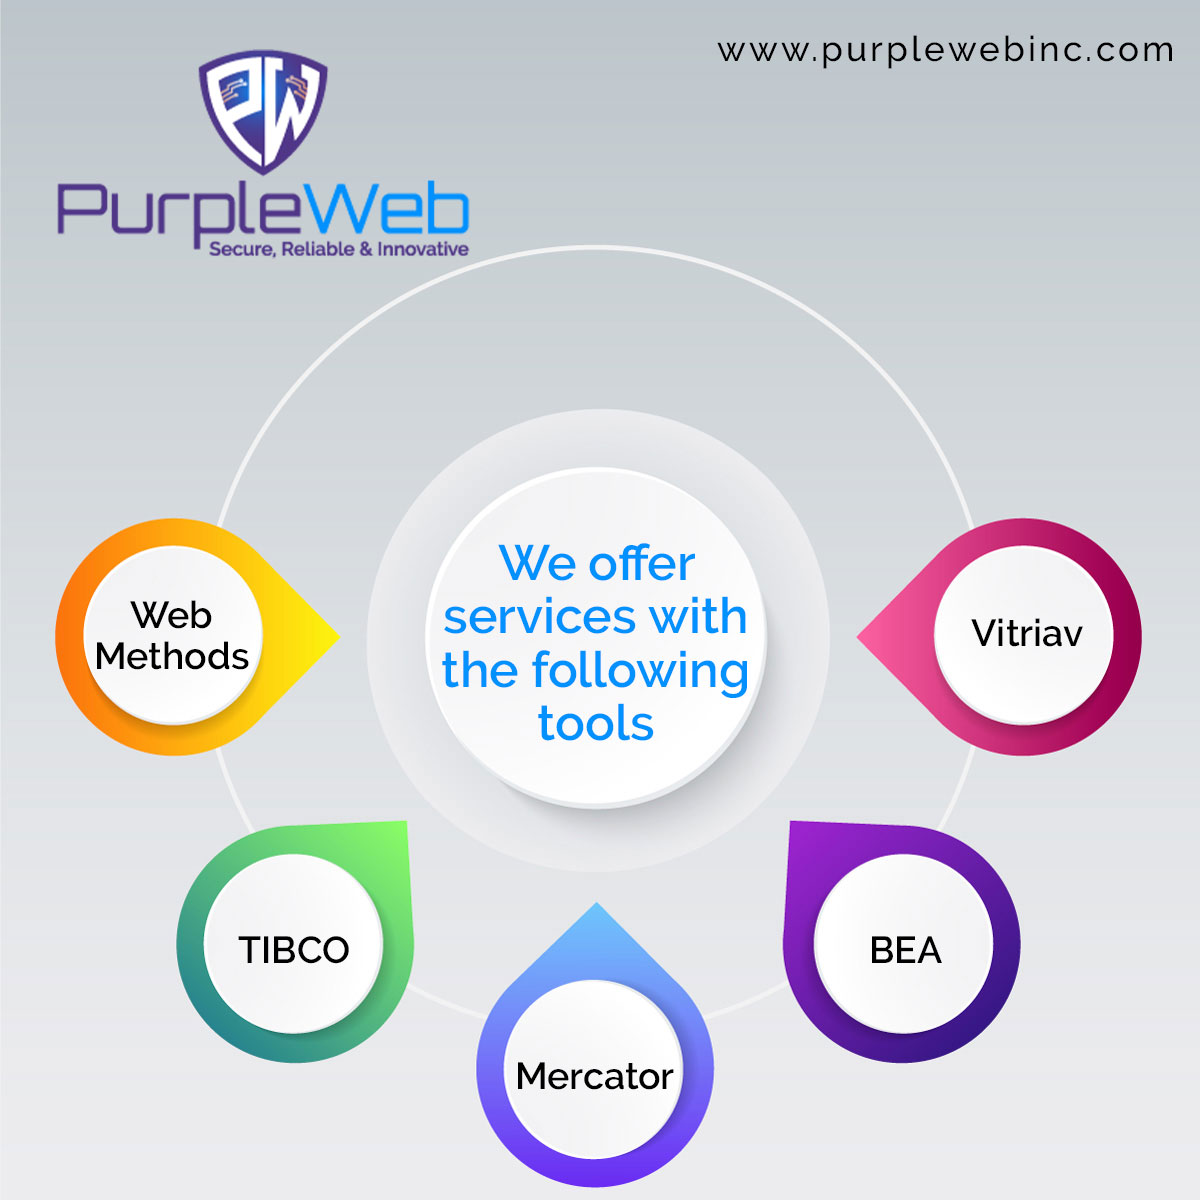 We offer EAI services with the following tools
> WebMethods
> TIBCO
> Mercator
> SeeBeyond
> BEA
> Vitriav
> Sybase Neon

#purpleweb #purplewebinc #cybersecurity #cybersecurityservices #career #ambition #projects #employ #tibco #mercator #bea #vitriav #sybase #neon